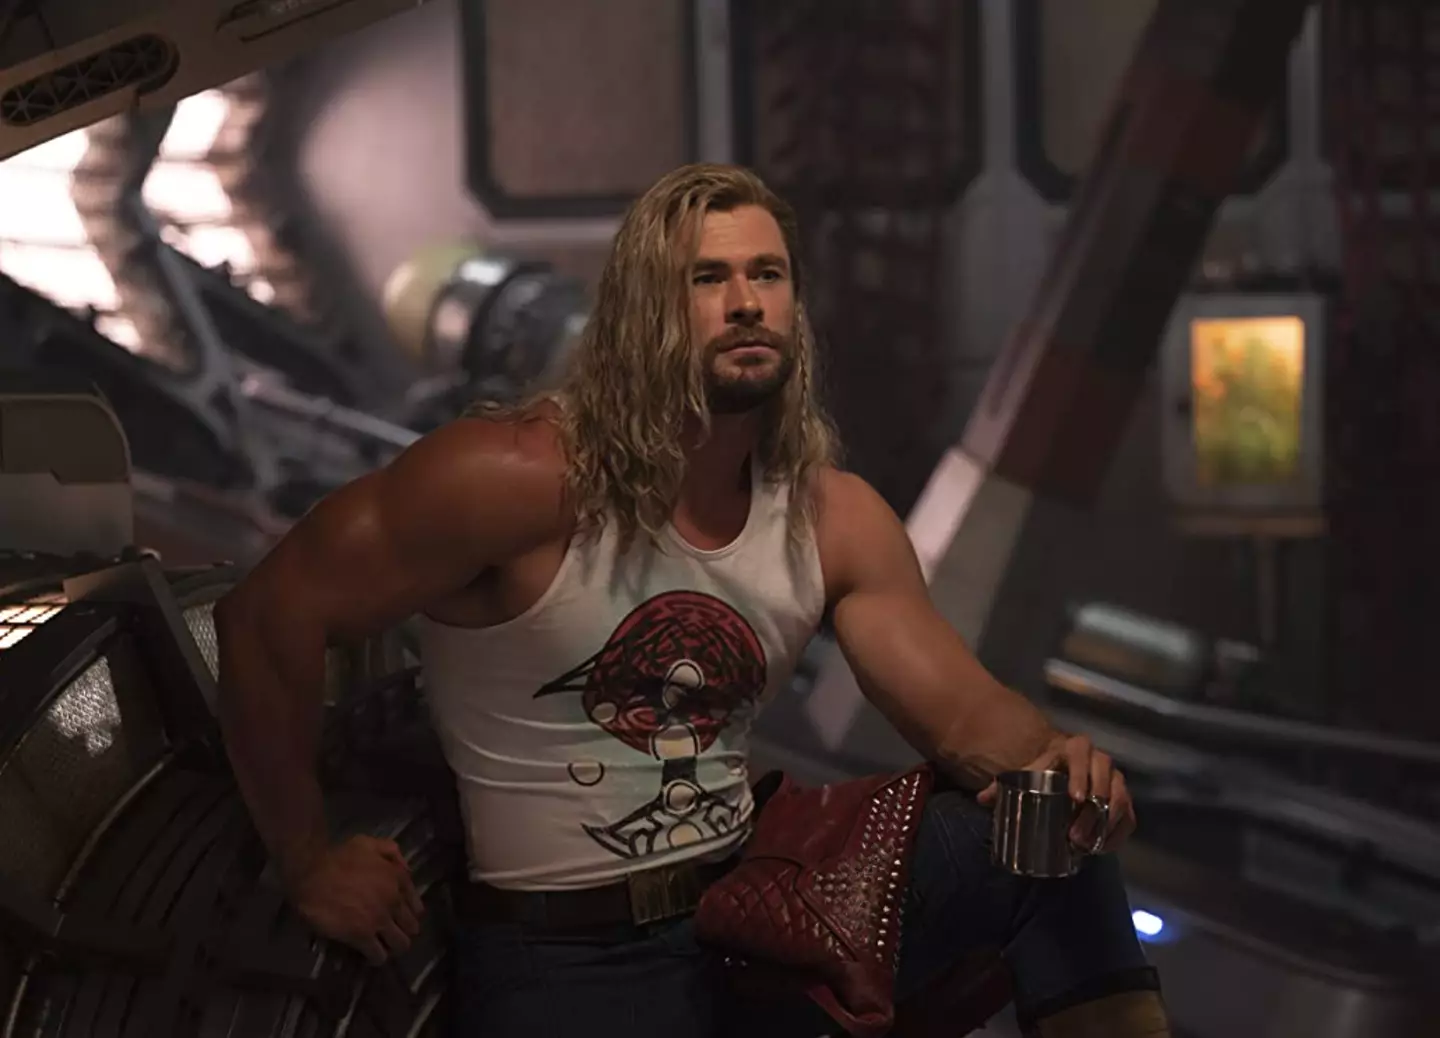 Social media users are joking Chris Hemsworth truly embodies Thor in real life.